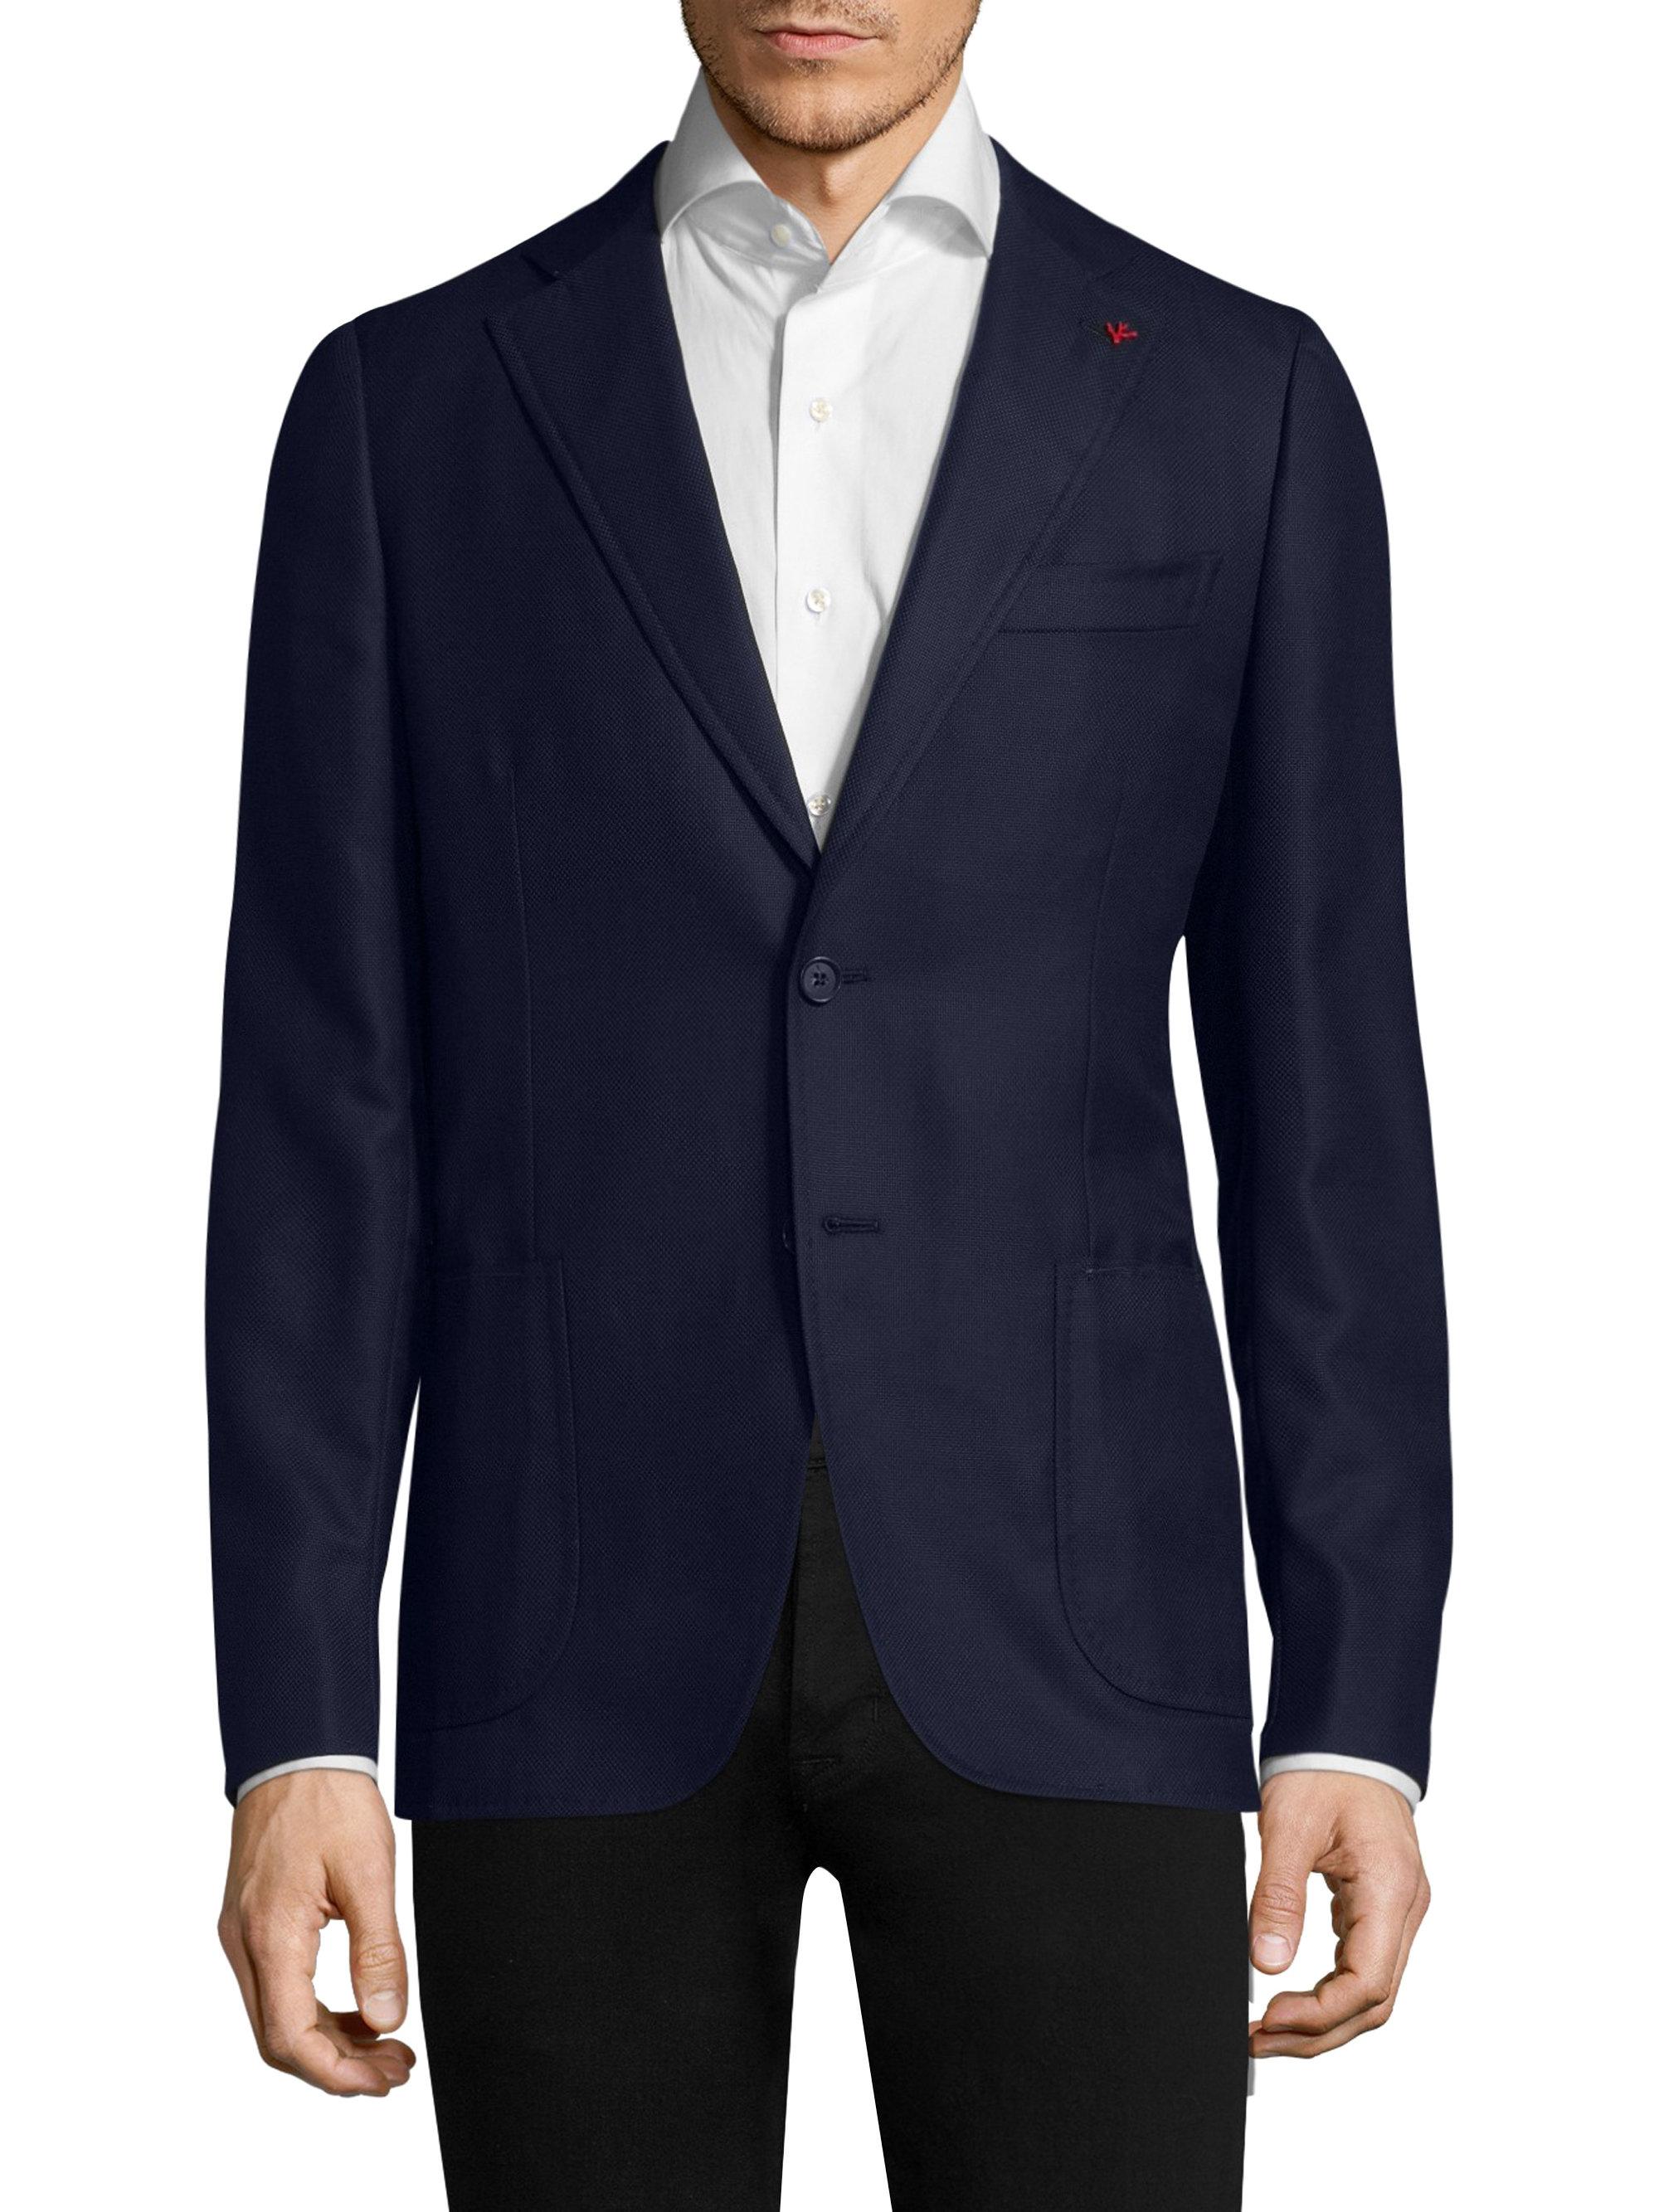 Lyst - Isaia Cortina Wool-cashmere Sportcoat in Blue for Men